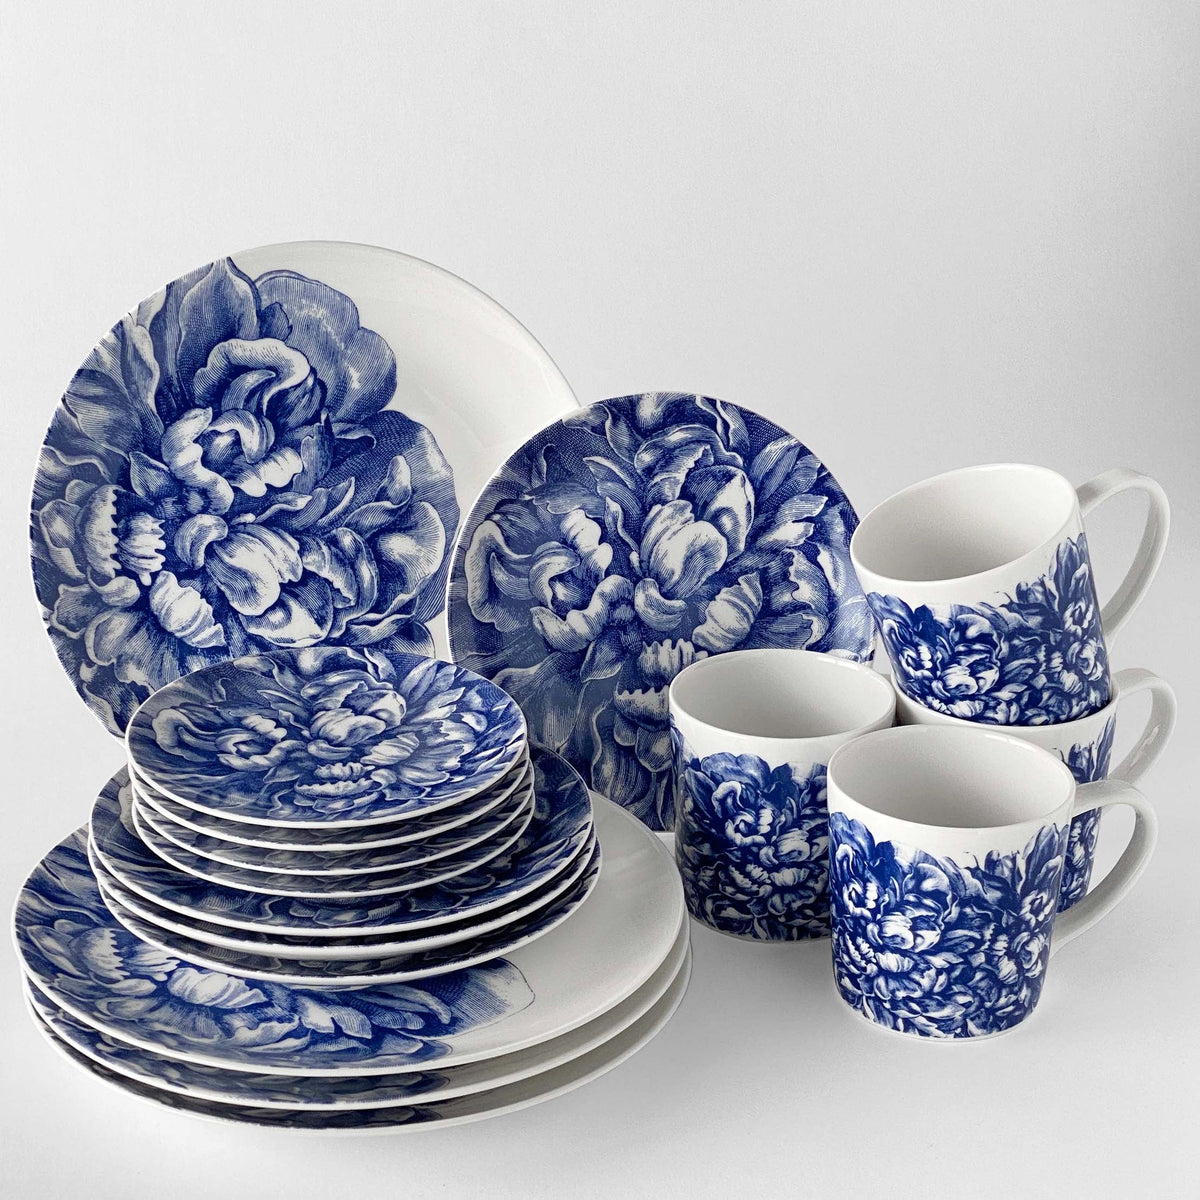 A collection of premium porcelain dinnerware with blue floral patterns, including Peony Small Plates by Caskata Artisanal Home, bowls, and mugs, arranged against a plain background.